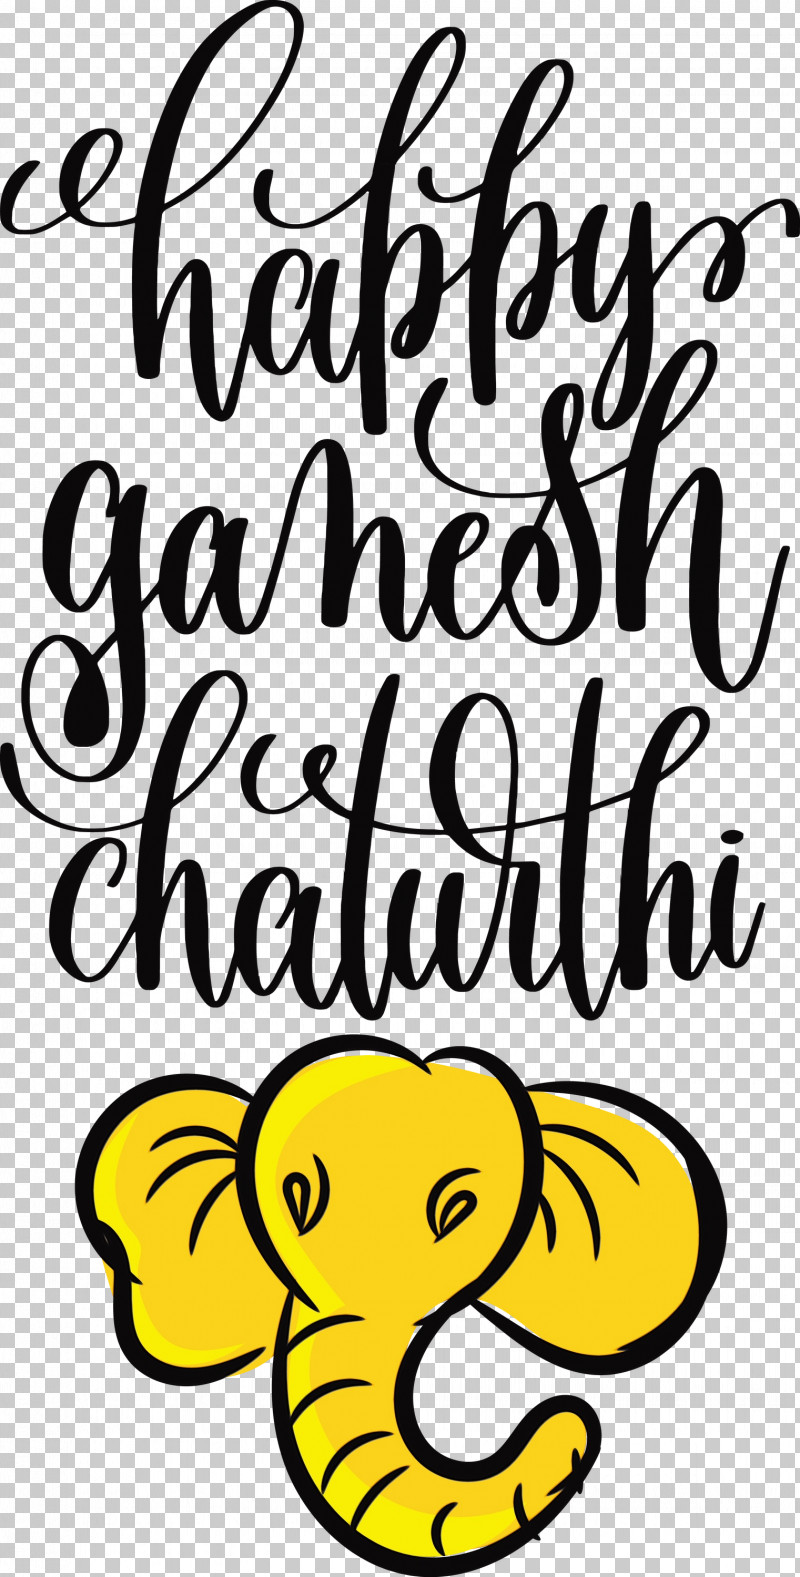 Cartoon Yellow Happiness Smiley Plant PNG, Clipart, Behavior, Biology, Cartoon, Happiness, Happy Ganesh Chaturthi Free PNG Download